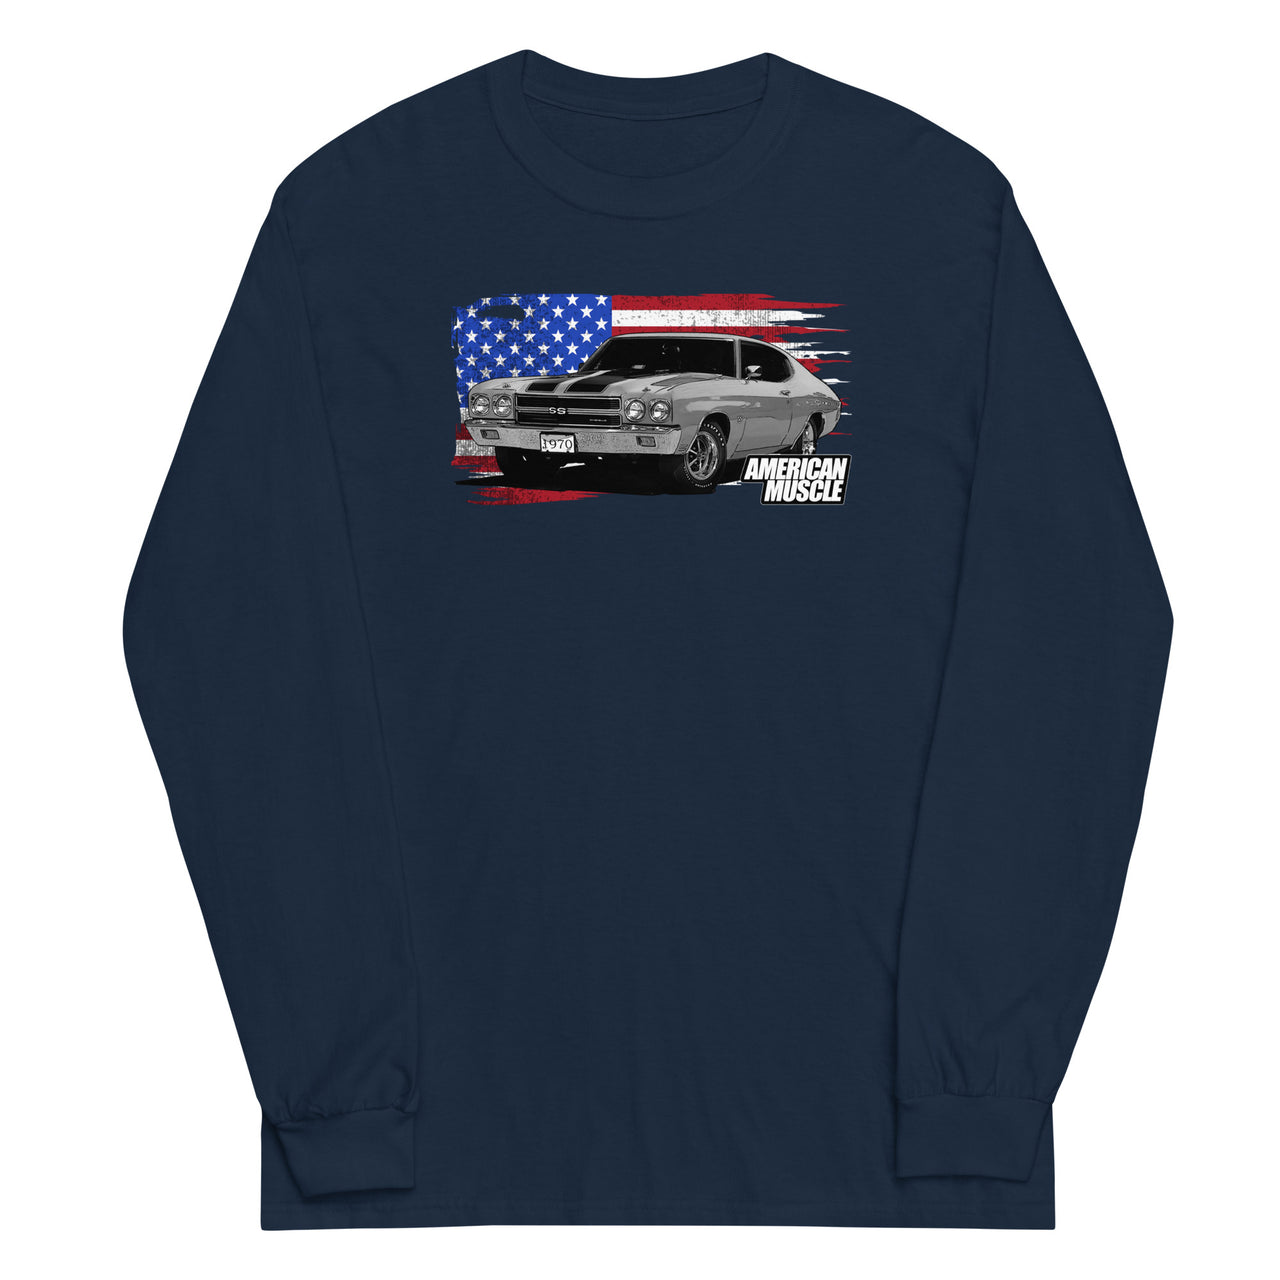 1970 Chevelle Long Sleeve Shirt in navy